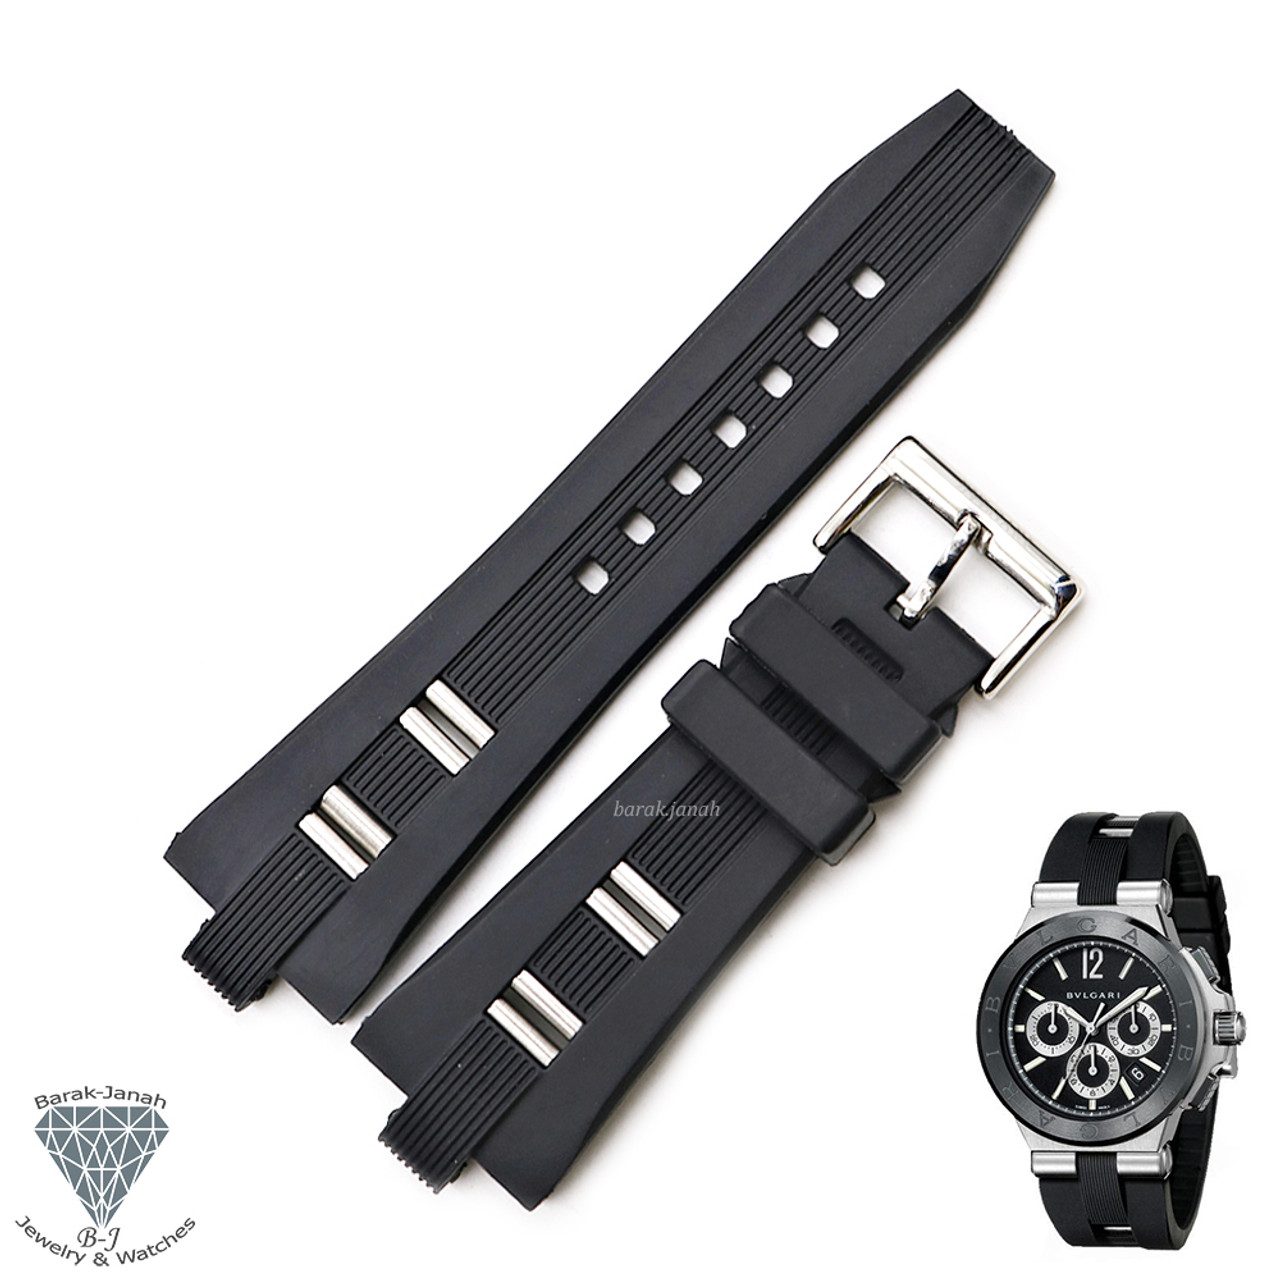 26mm Black Rubber Band For Bvlgari 